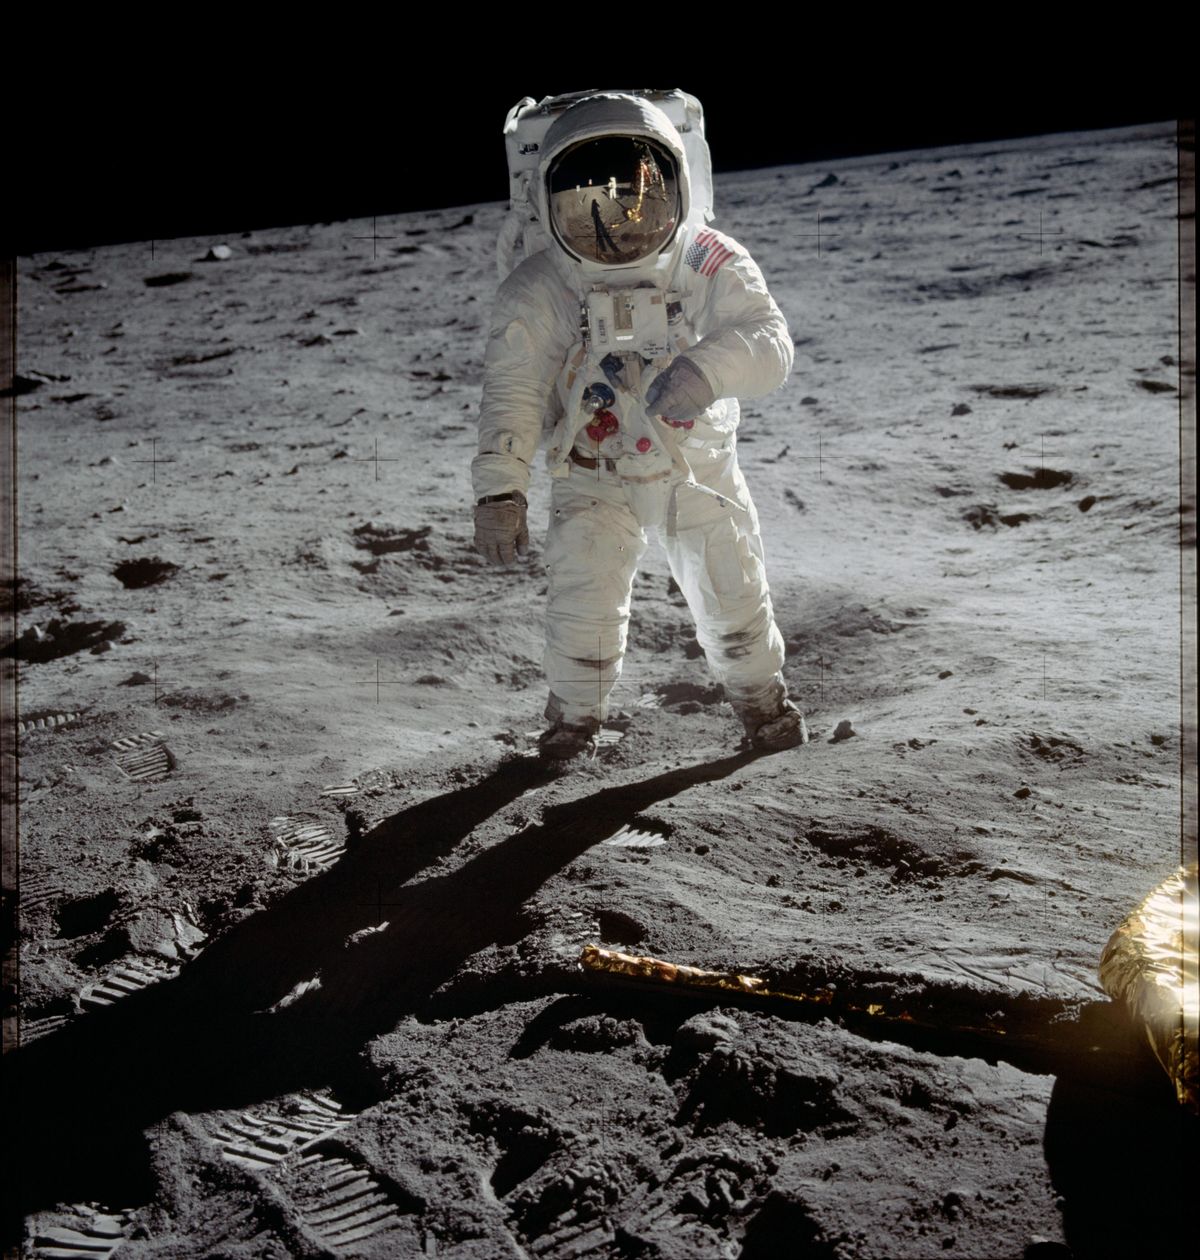 Astronaut Buzz Aldrin walks on the surface of the moon near the leg of the lunar module Eagle during the Apollo 11 mission. Mission commander Neil Armstrong took this photograph with a 70mm lunar surface camera. While astronauts Armstrong and Aldrin explored the Sea of Tranquility region of the moon, astronaut Michael Collins remained with the command and service modules in lunar orbit. Credit: NASA (NASA)